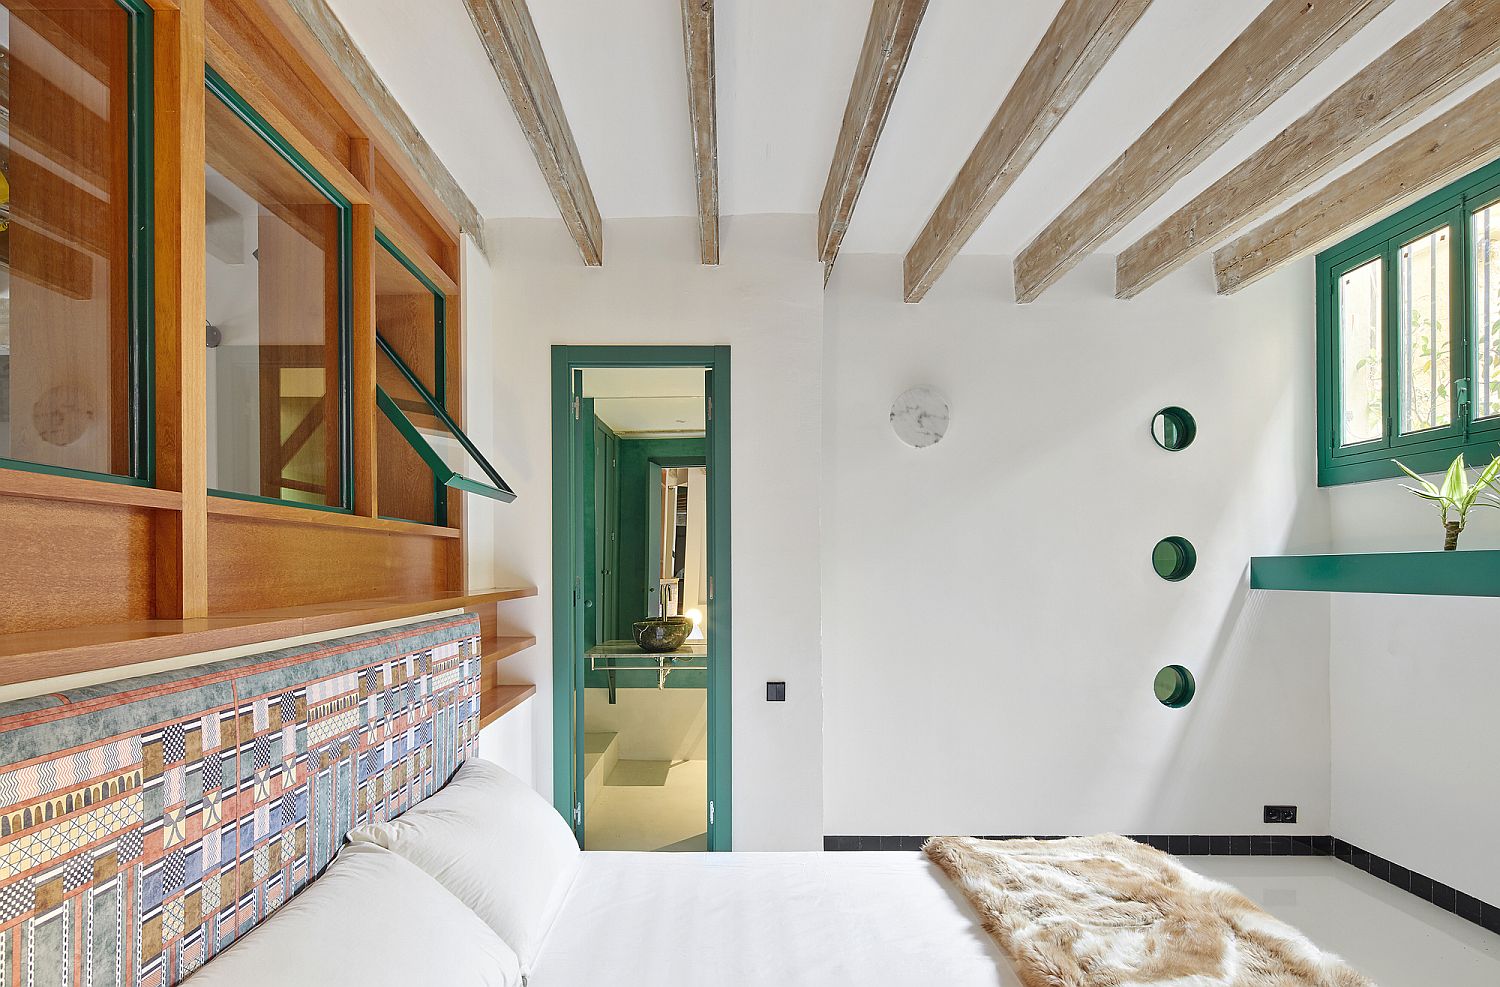 Bedroom in white with built-in shelving, green window frames and ceiling beams